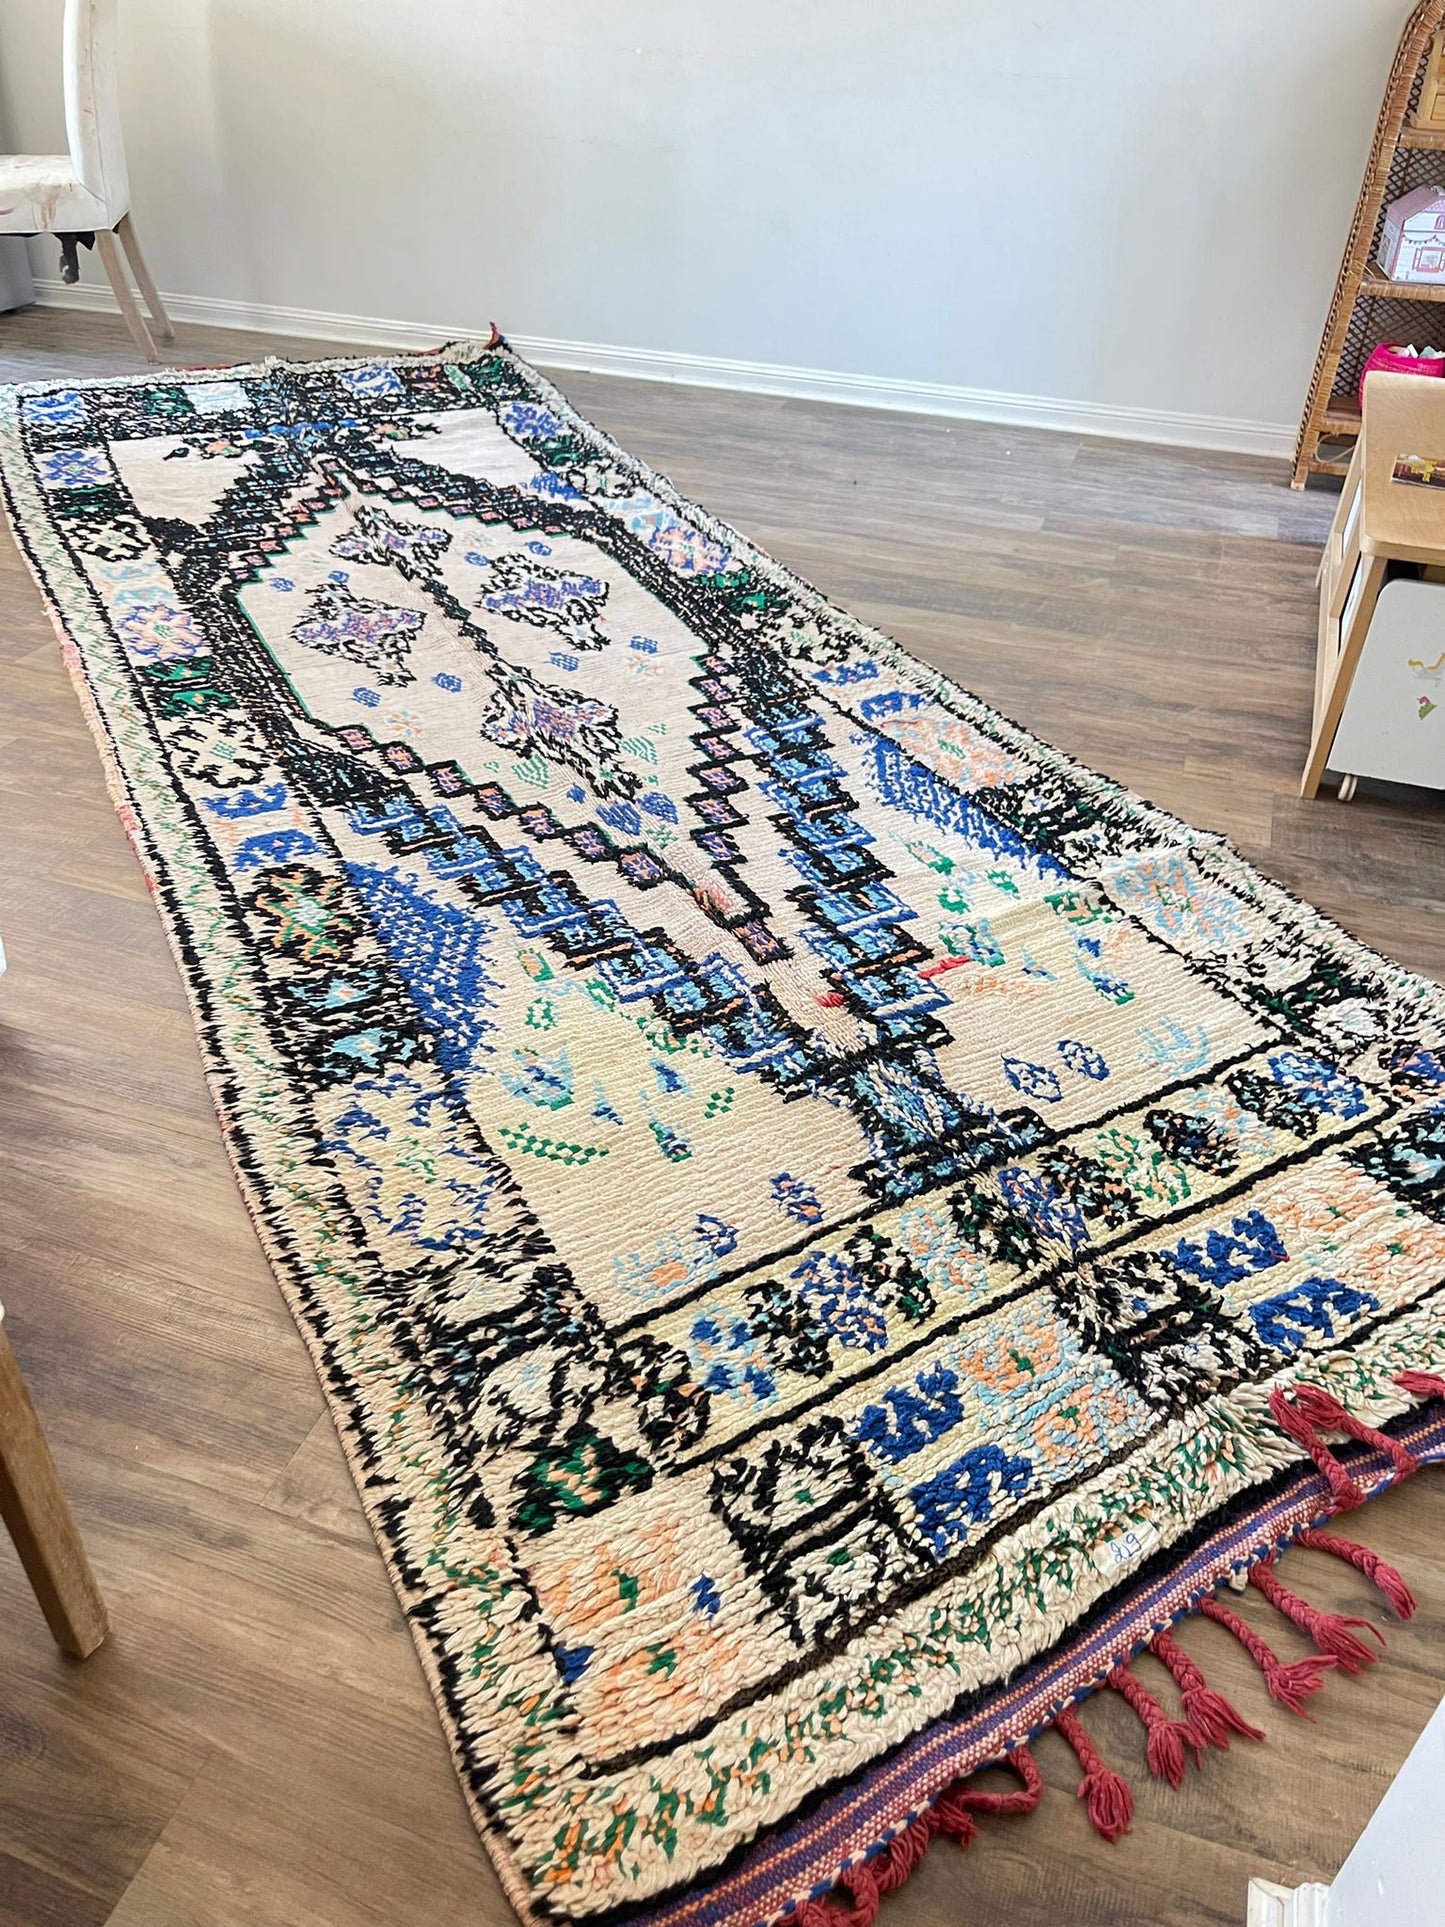 cream coloured Vintage Moroccan boujaad rug with blue, green and light orange symbols and patterns